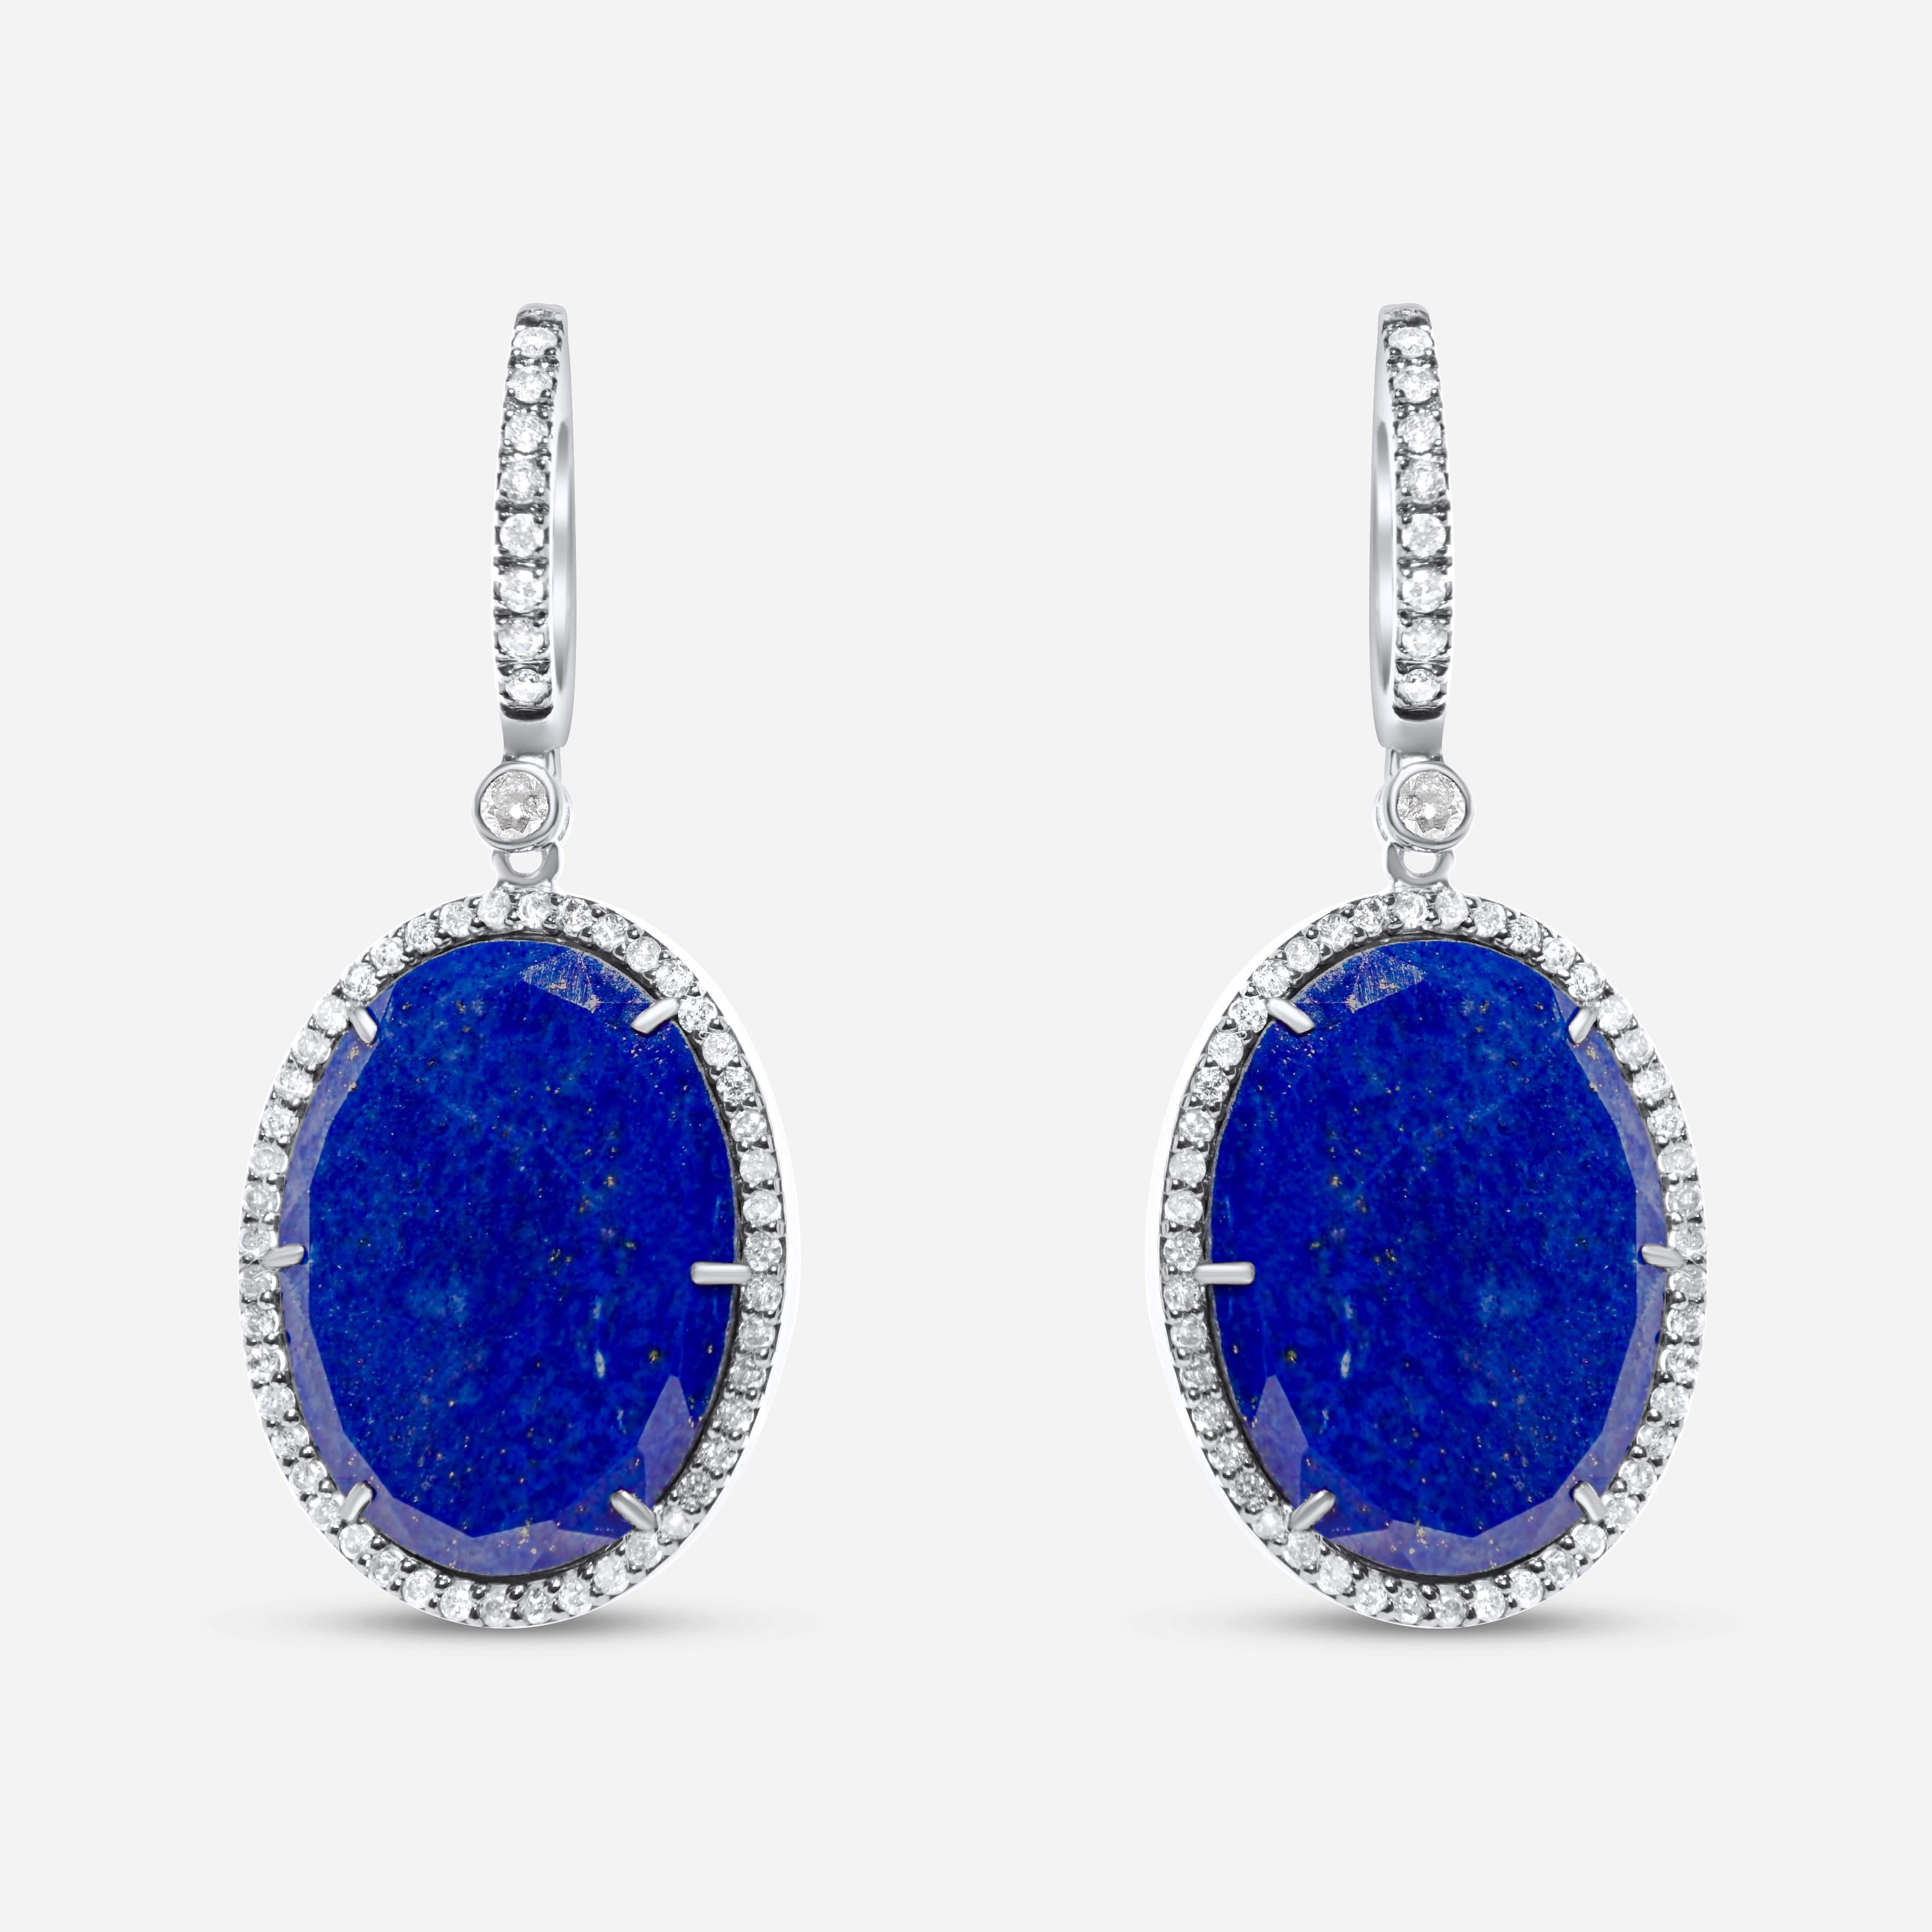 Blue Lapis Lazuli Oval Cabochon Silver Diamond Halo Drop 18K White Gold Earrings
2.00 CT Silver White Diamonds
Genuine Lapis Lazuli Cabochon Slice Gemstones

Important Information:
Please note that this item will take 2-4 weeks to deliver - it is